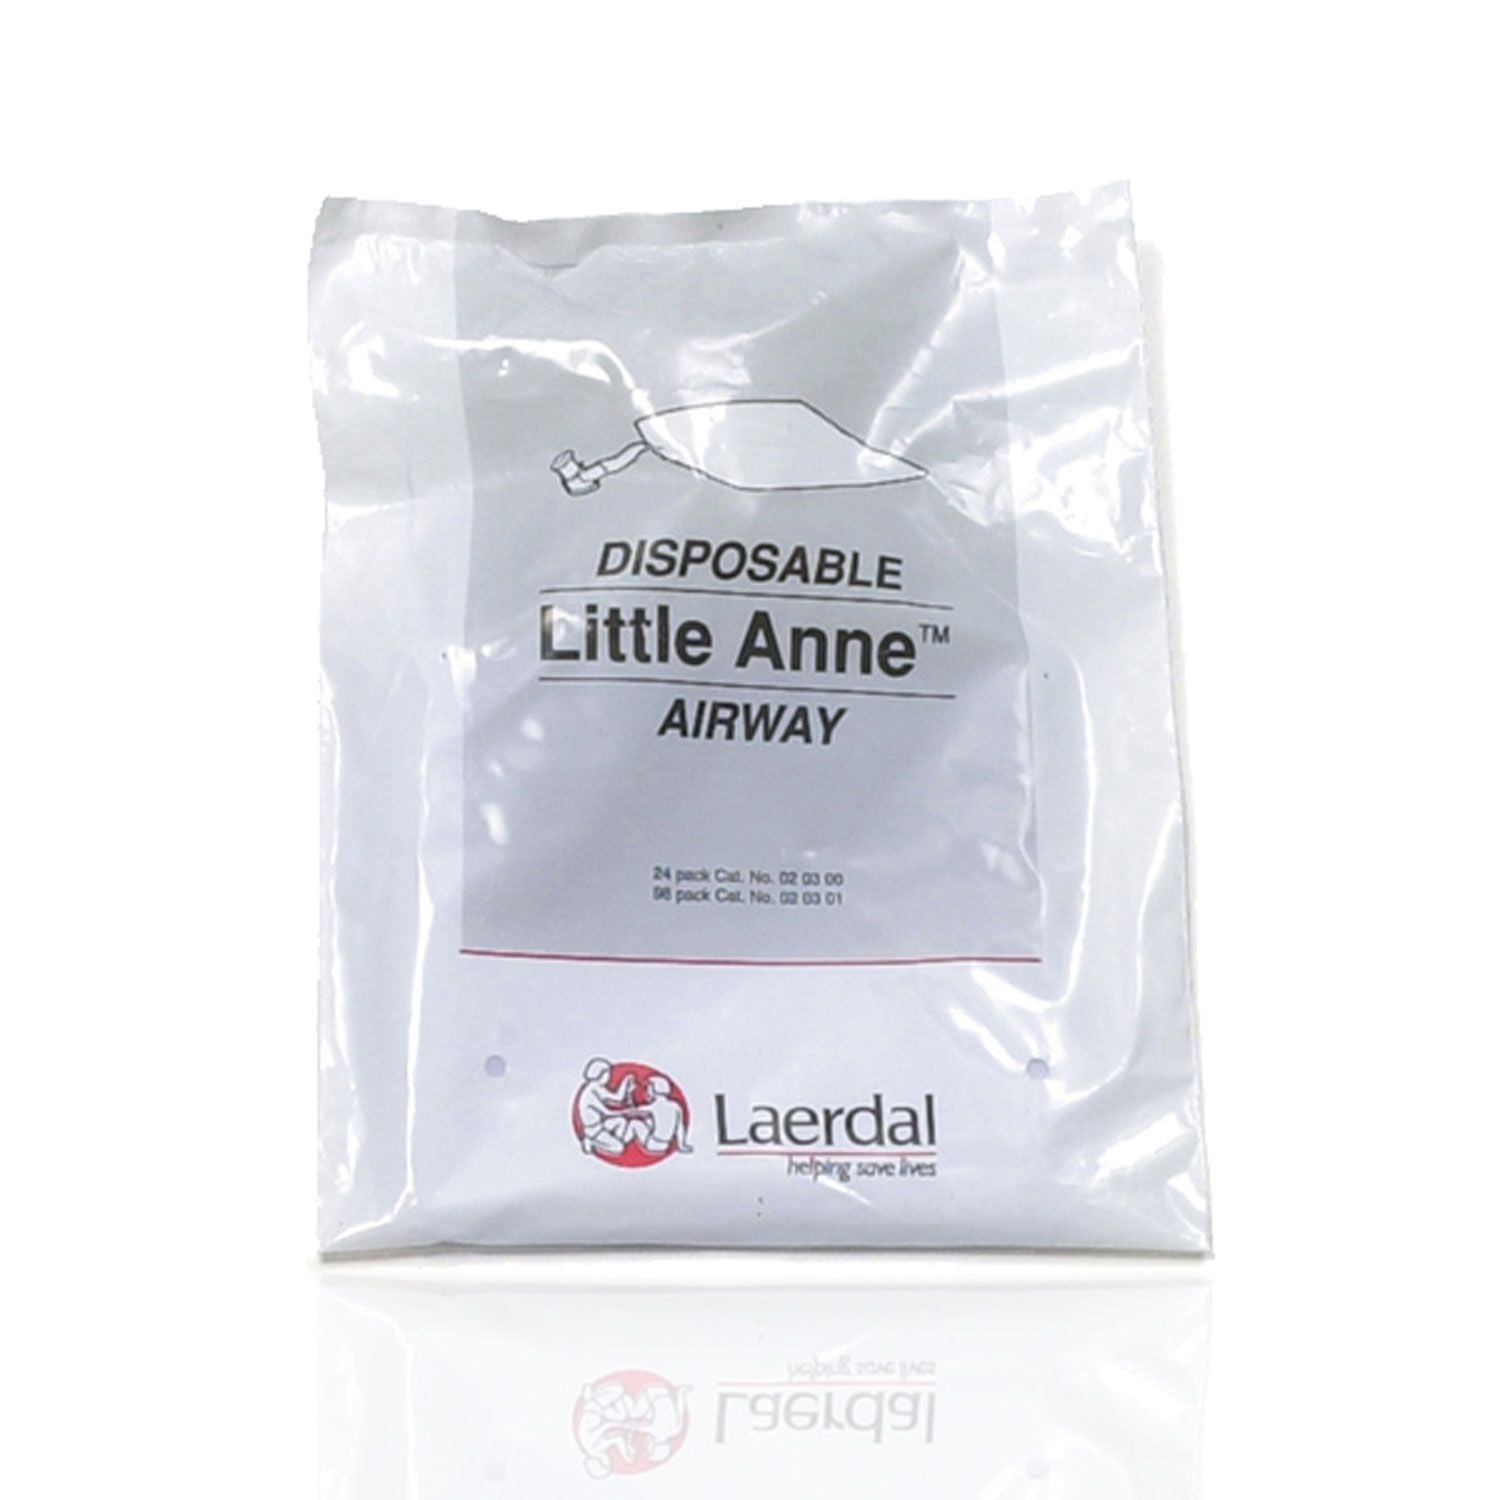 Little Anne Disposable Airways | Pack of 24